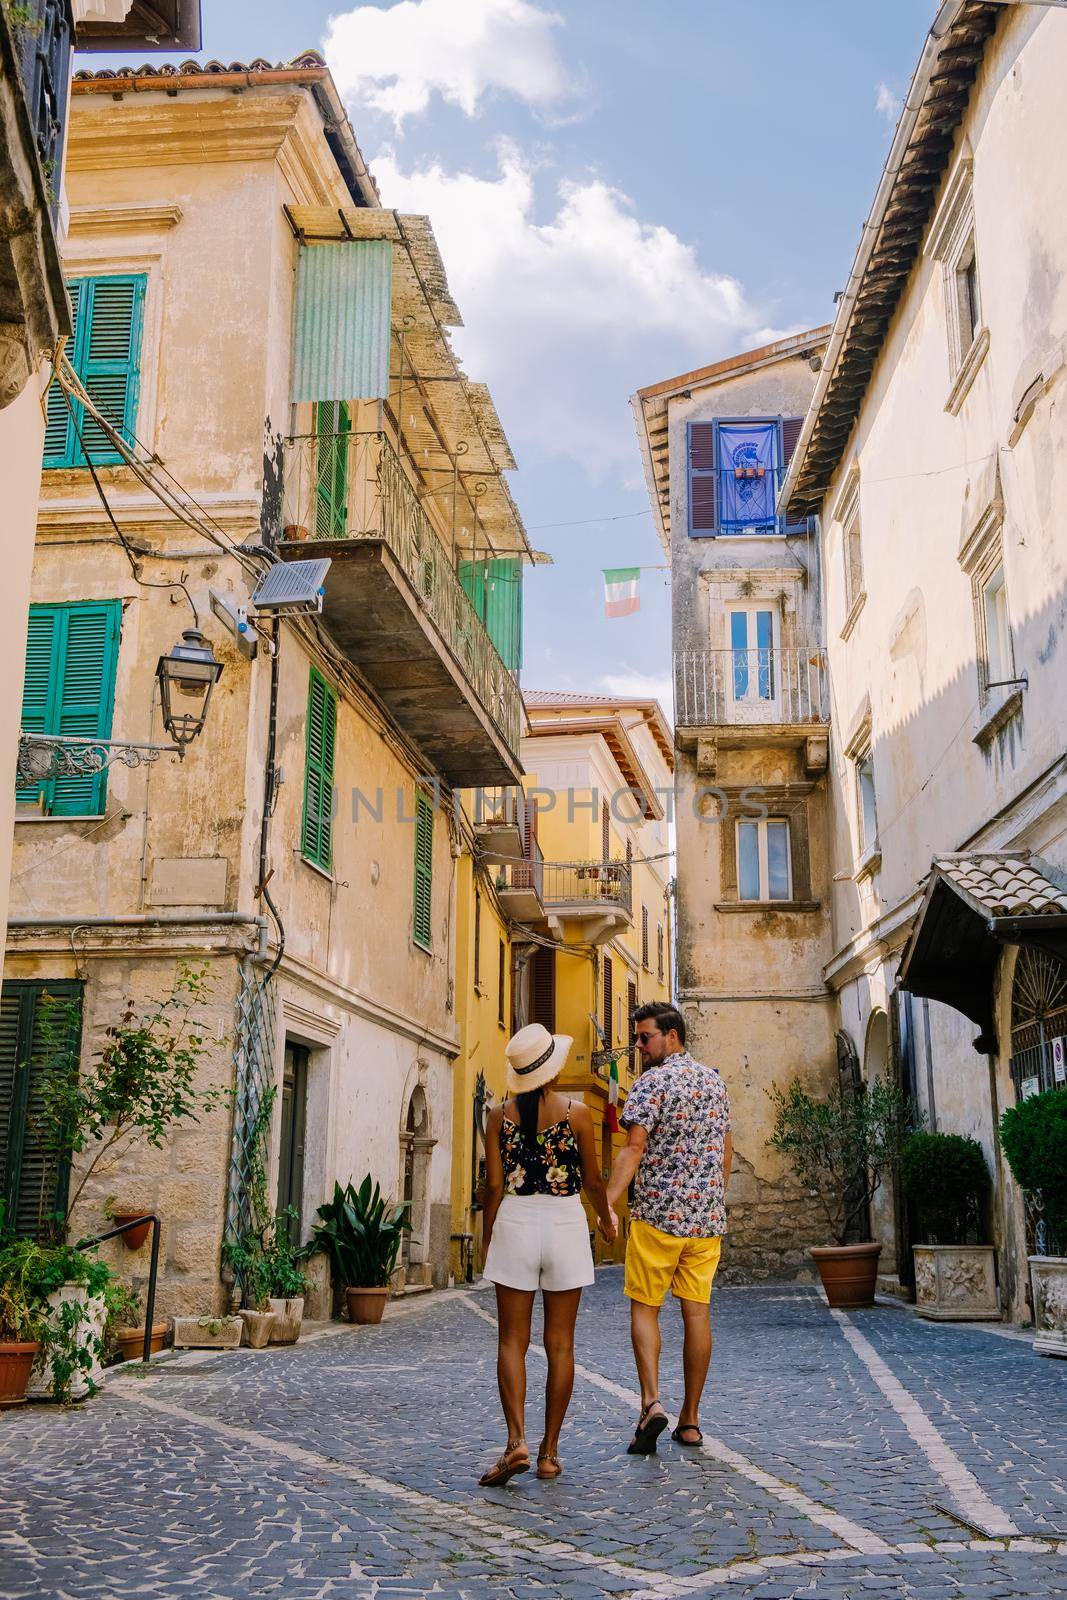 Overview of Fiuggi in Italy, Scenic sight in Fiuggi, province of Frosinone, Lazio, central Italy. Europe, couple walking on the colorful streets of Fiuggi by fokkebok